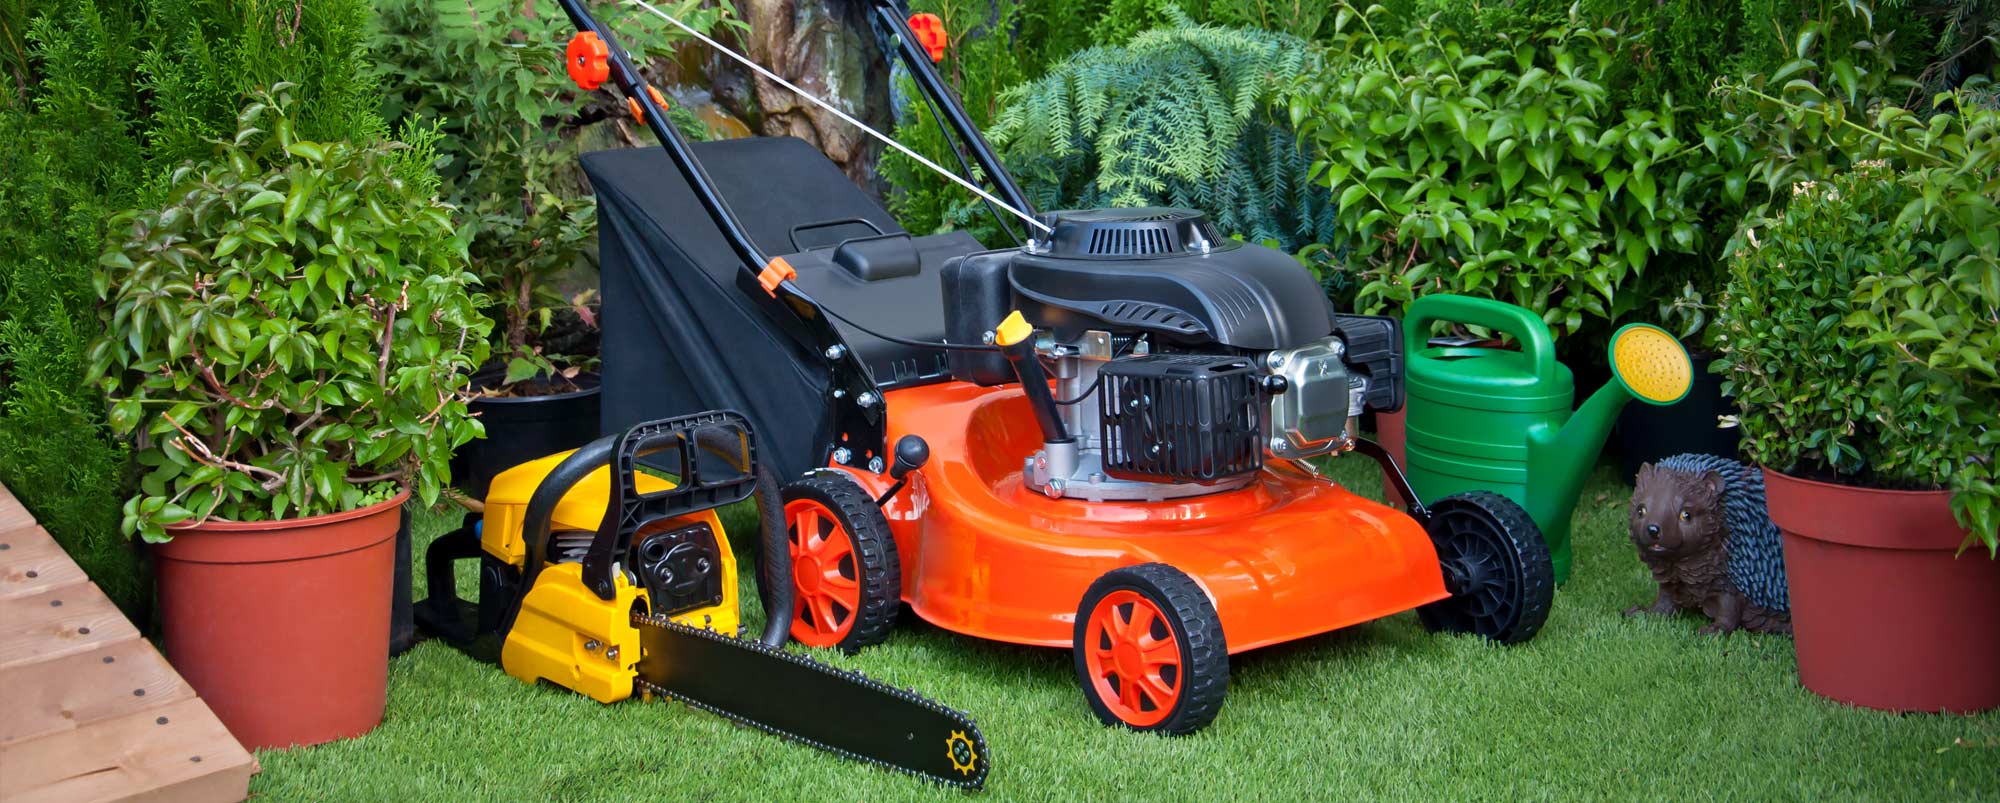 Grouping of lawn care equipment including a walk-behind push lawn mower and gas chainsaw